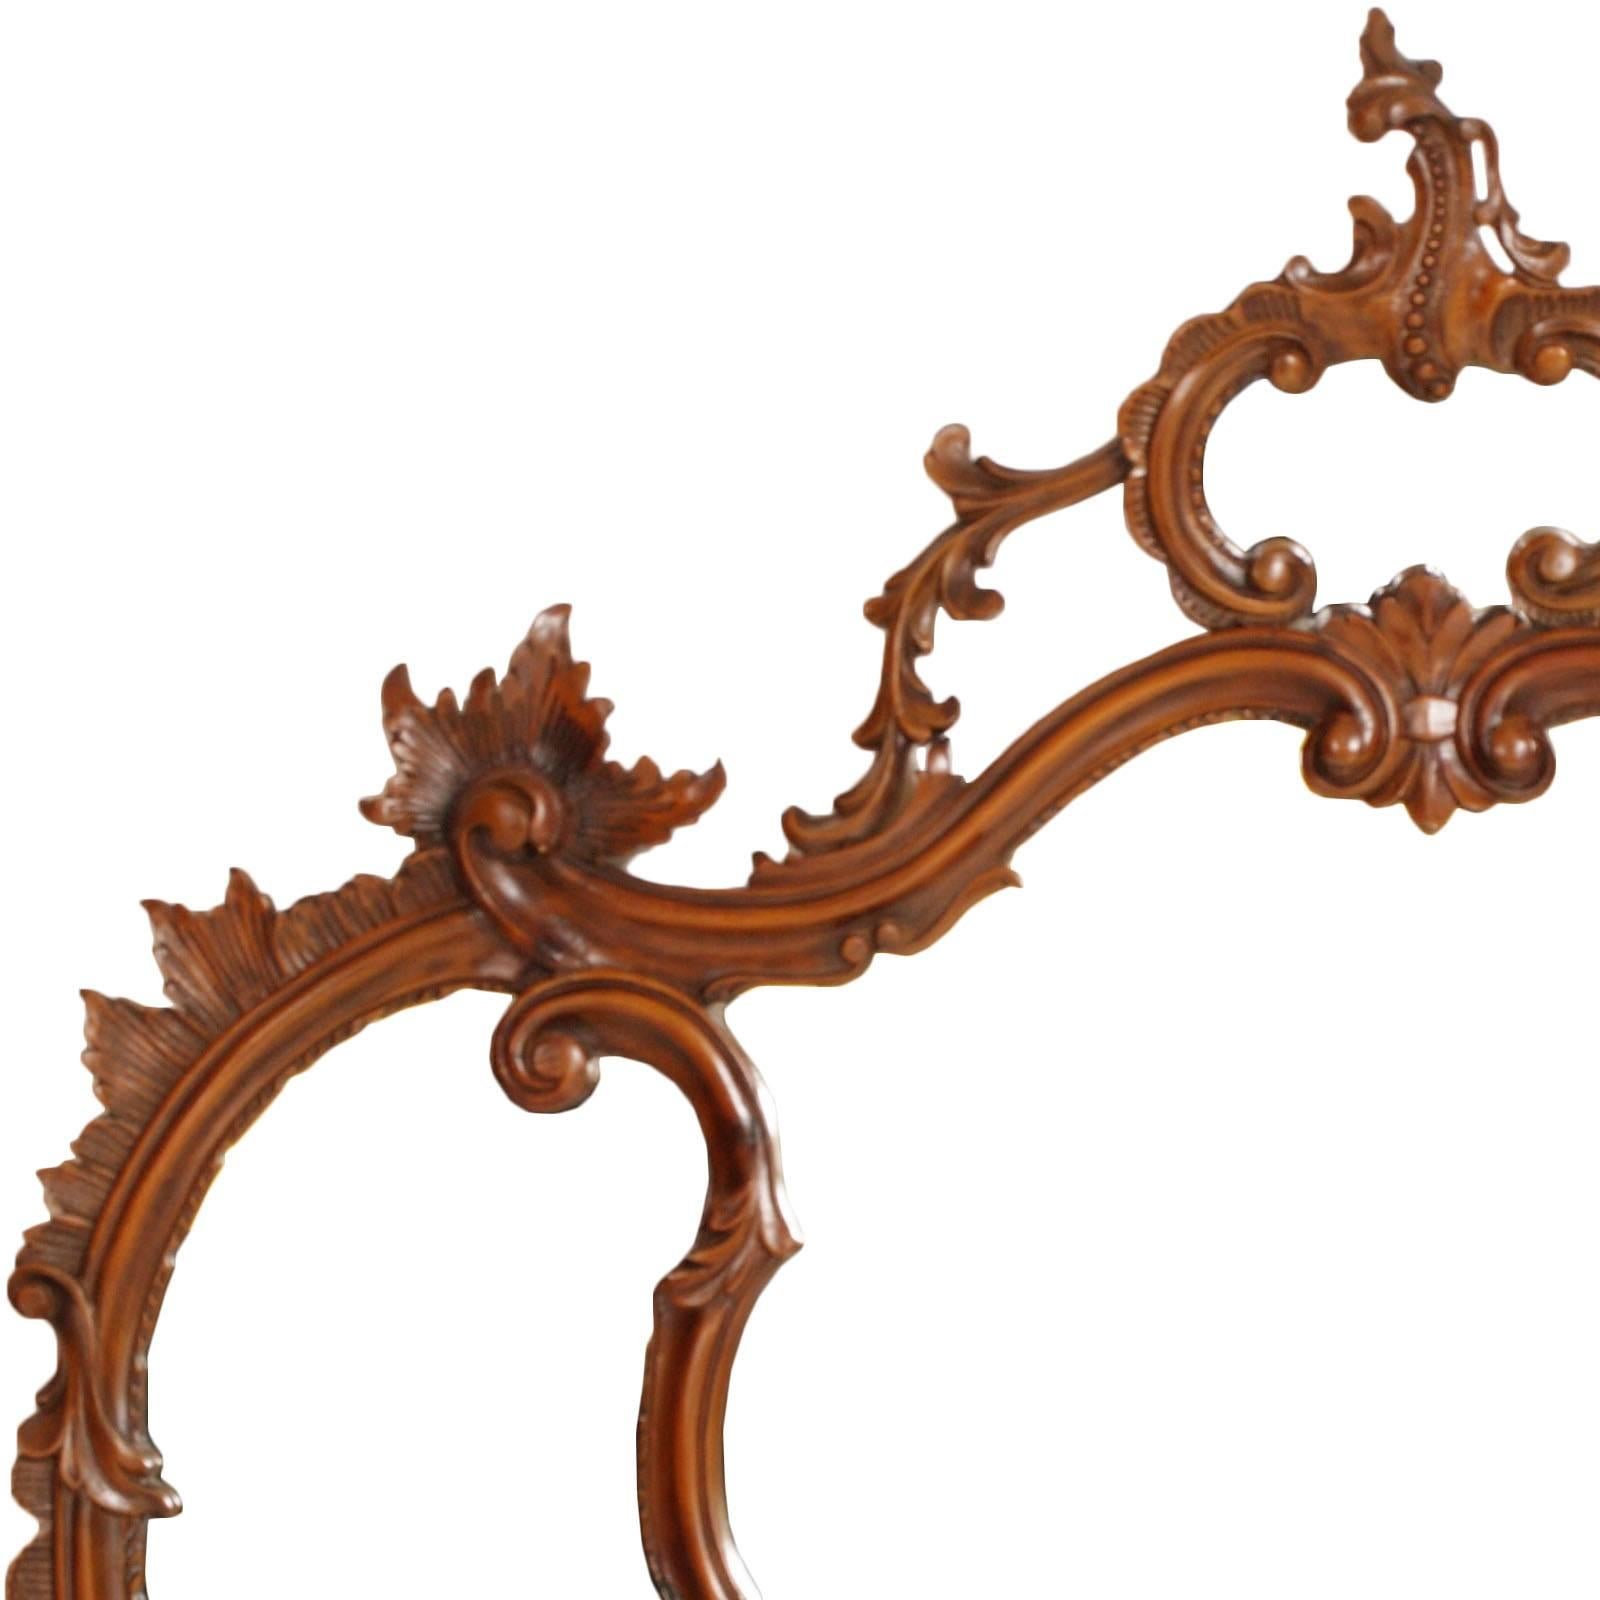 Early 20th century important Venetian new rococo wall mirror in richly hand-carved walnut polished to wax

Measures cm: H 110 x W 120 x D 10.